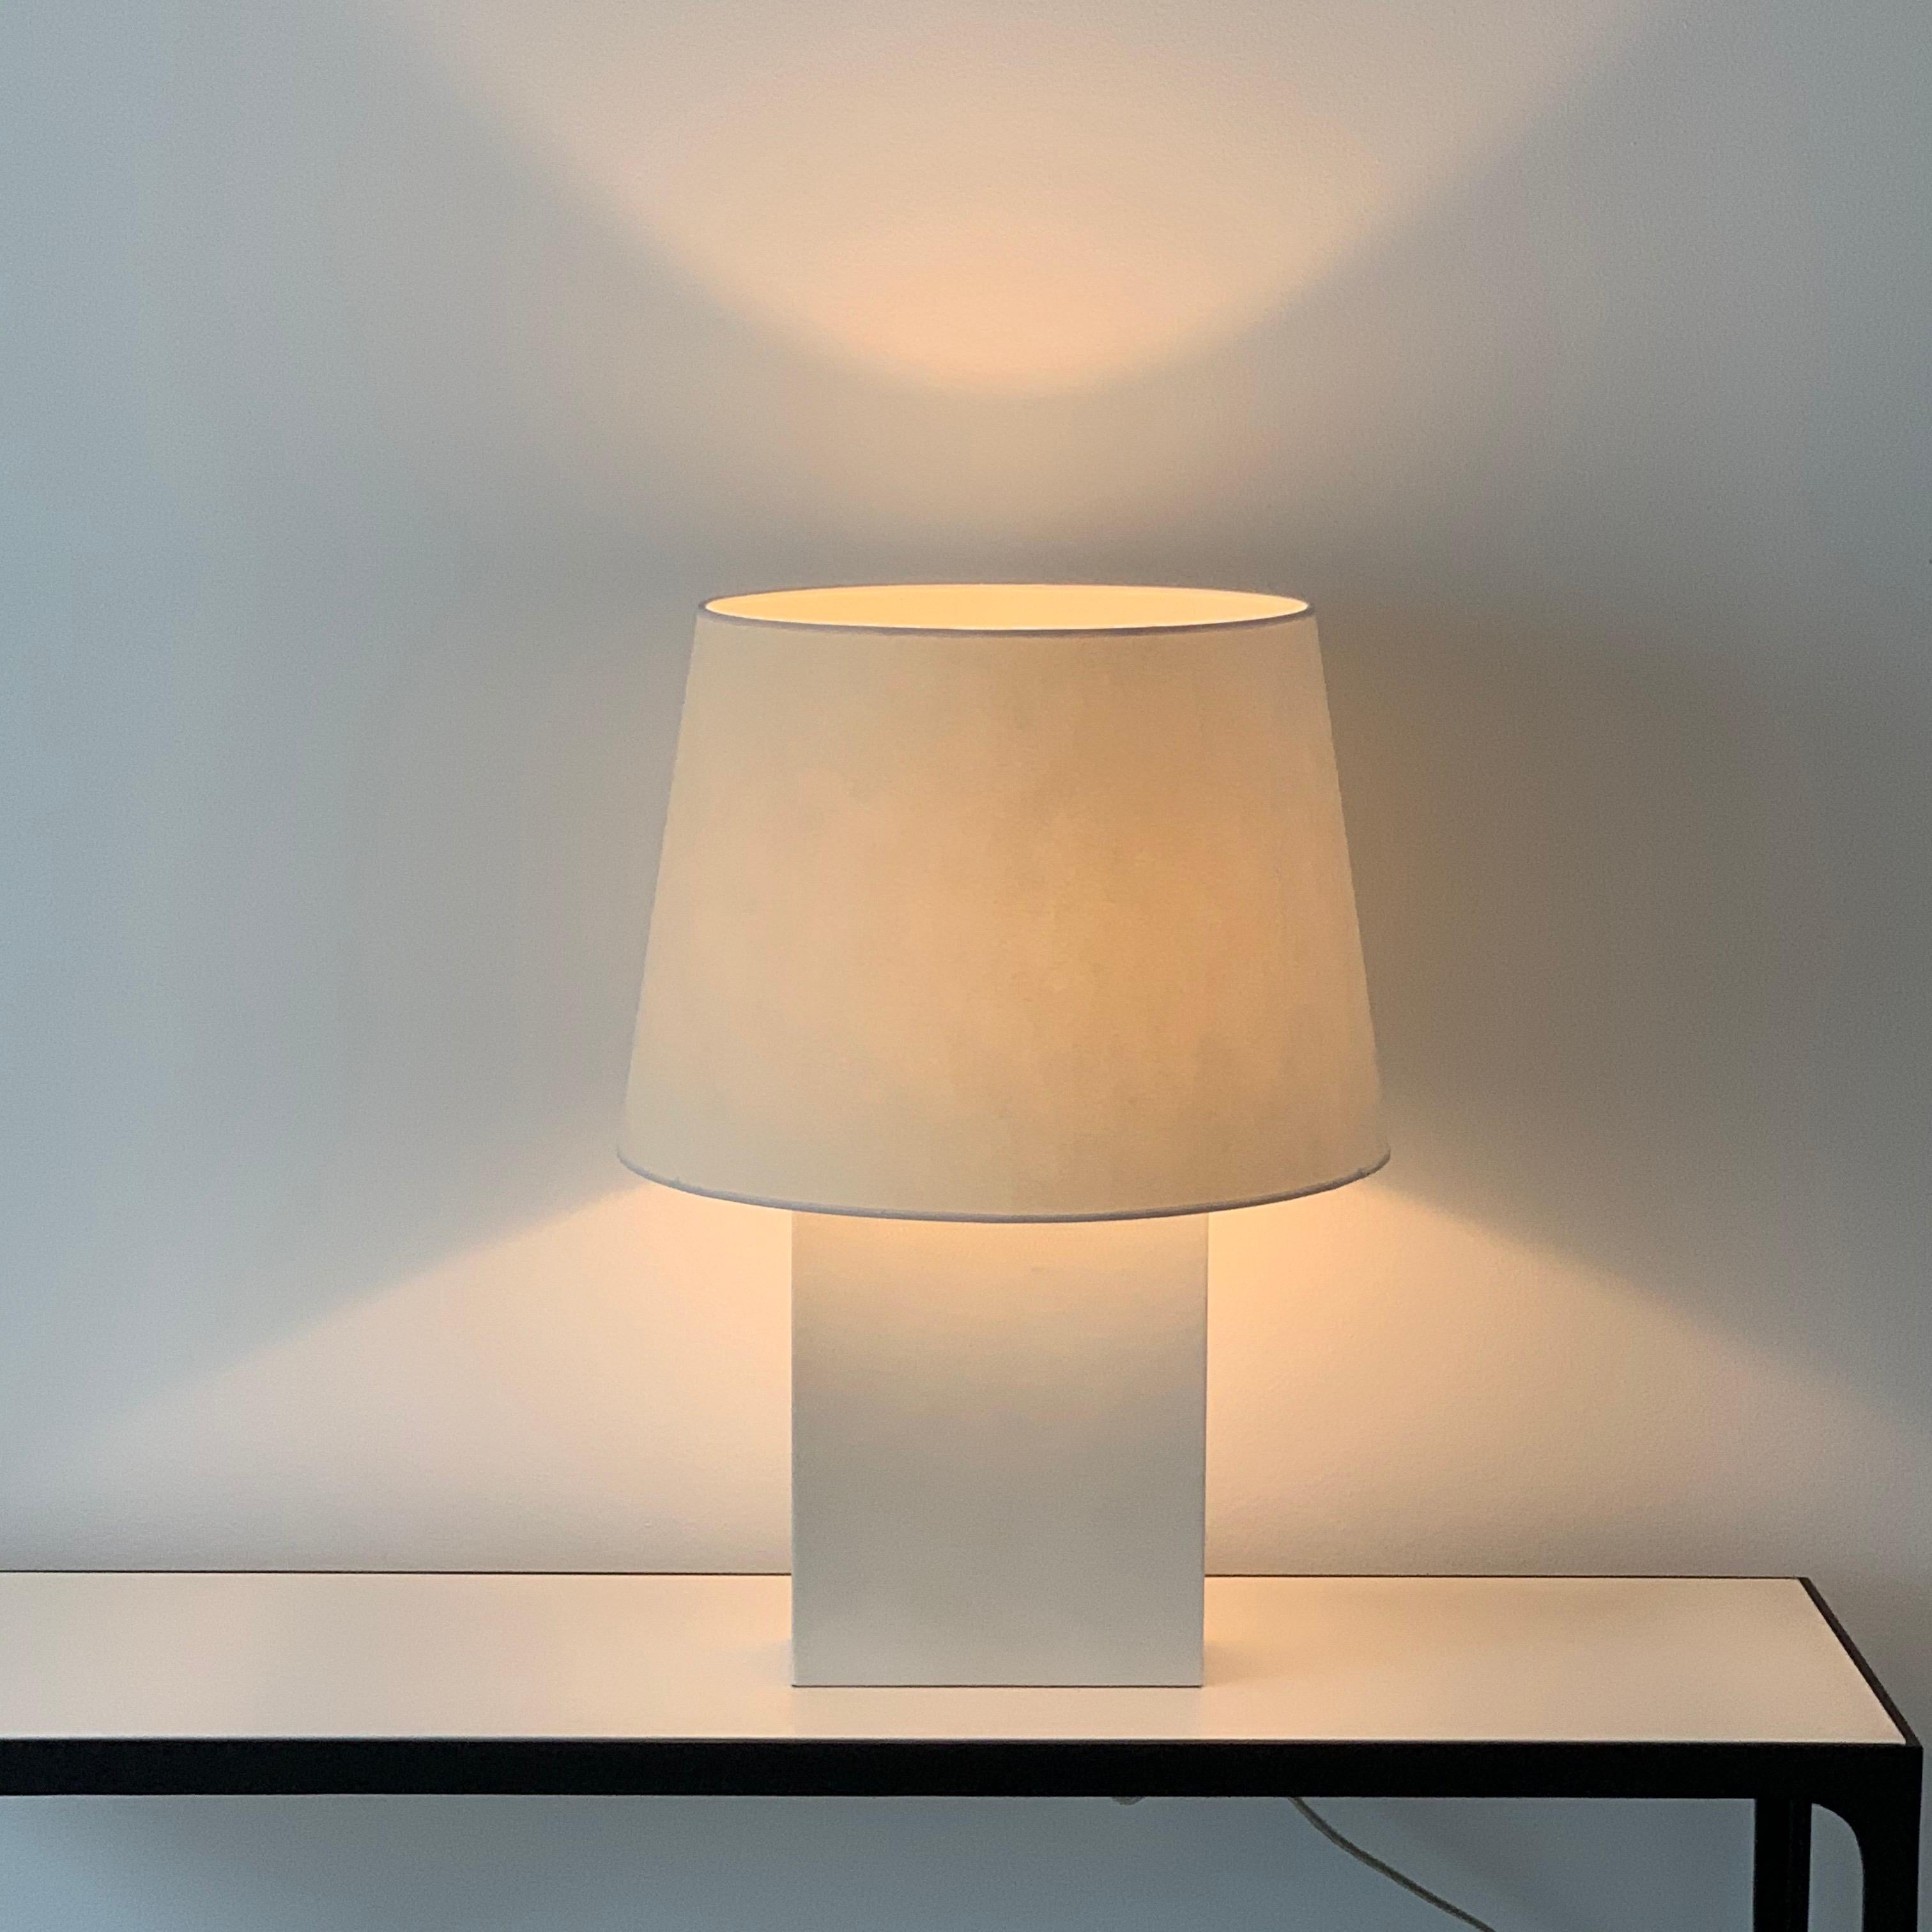 Large 'Bloc' parchment lamp by Design Frères.

Attractive European style shade mount with no apparent harp / final. Comes with the matching custom paper shade shown.

Handmade with real goatskin parchment and wired with UL listed parts.

The